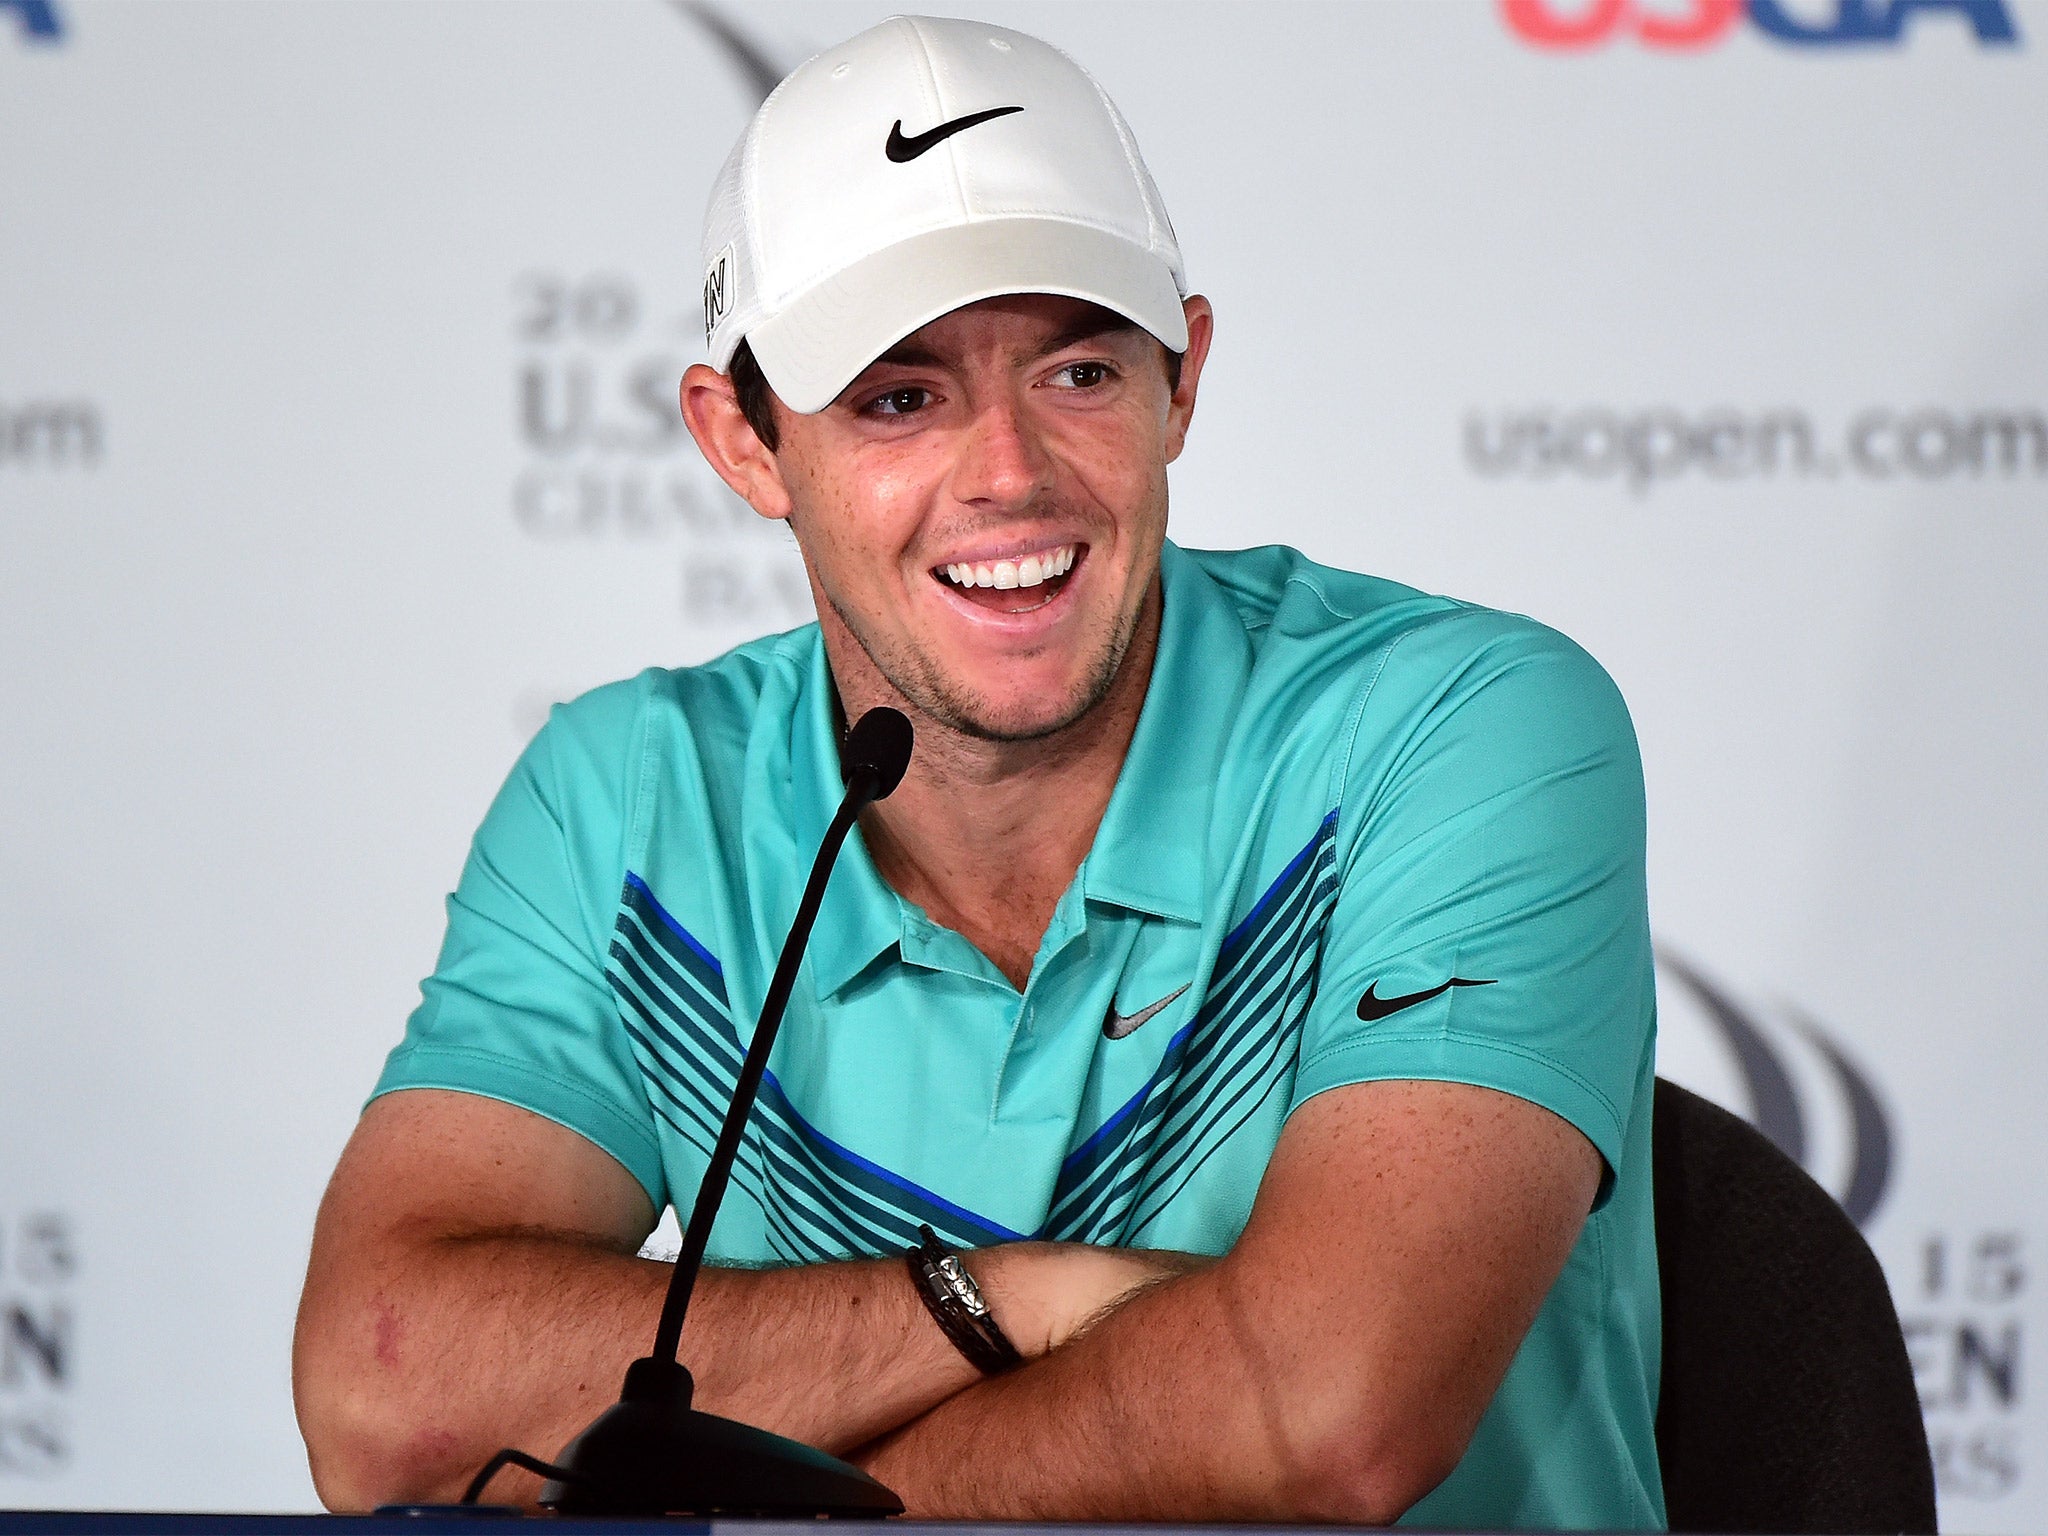 Rory McIlroy in relaxed mood at Chambers Bay on Wednesday